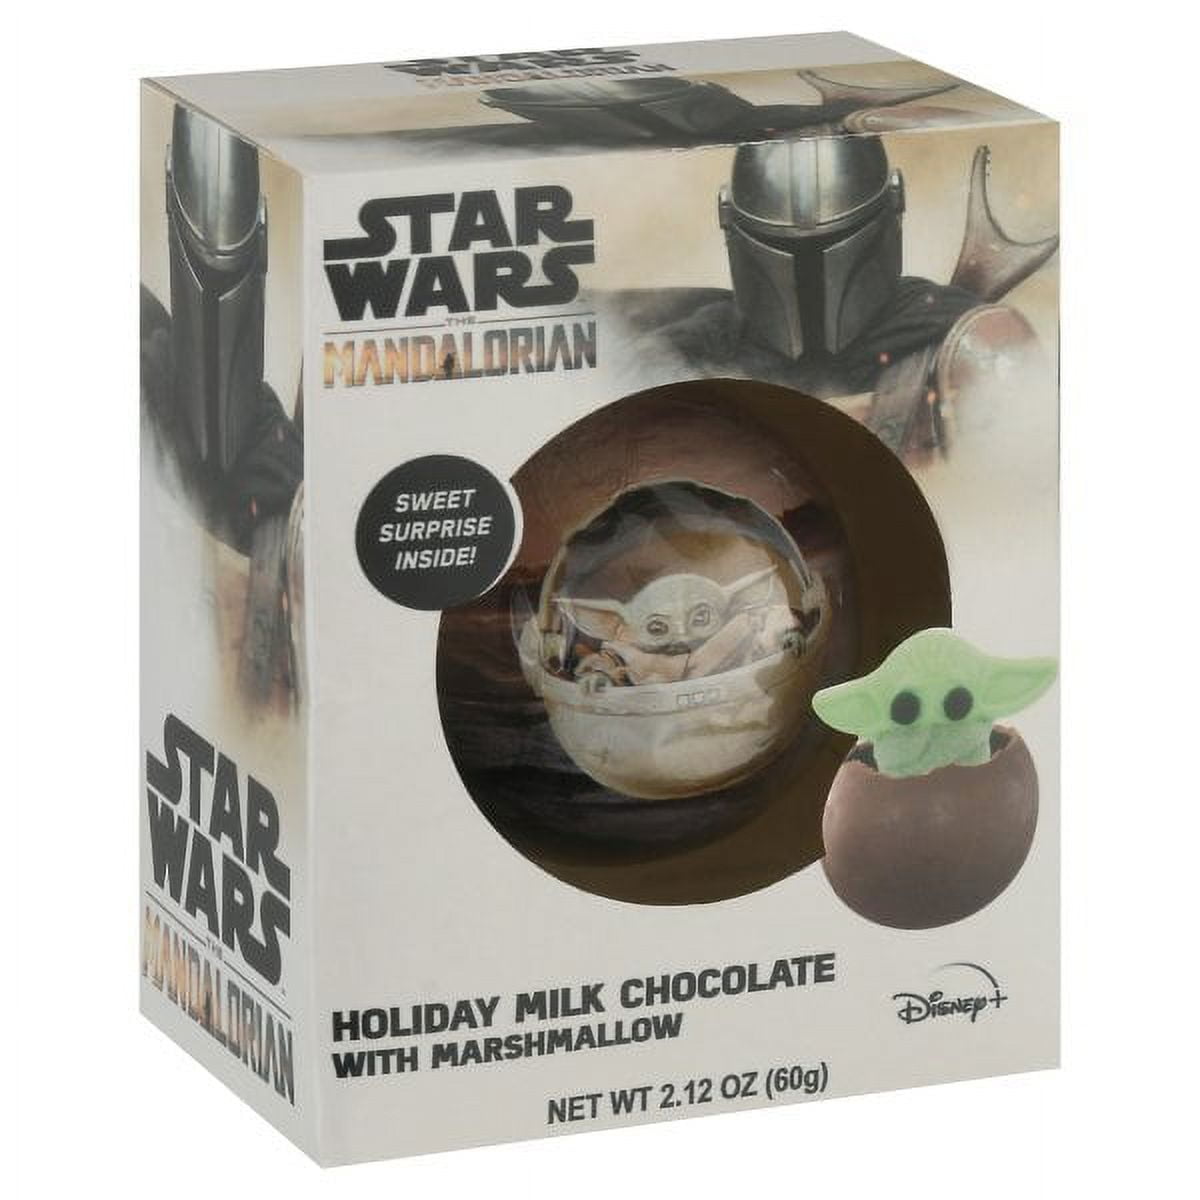 Galerie Holiday Star Wars: The Mandalorian The Child Goblet with Hard  Candy, 1.89 oz - Harris Teeter